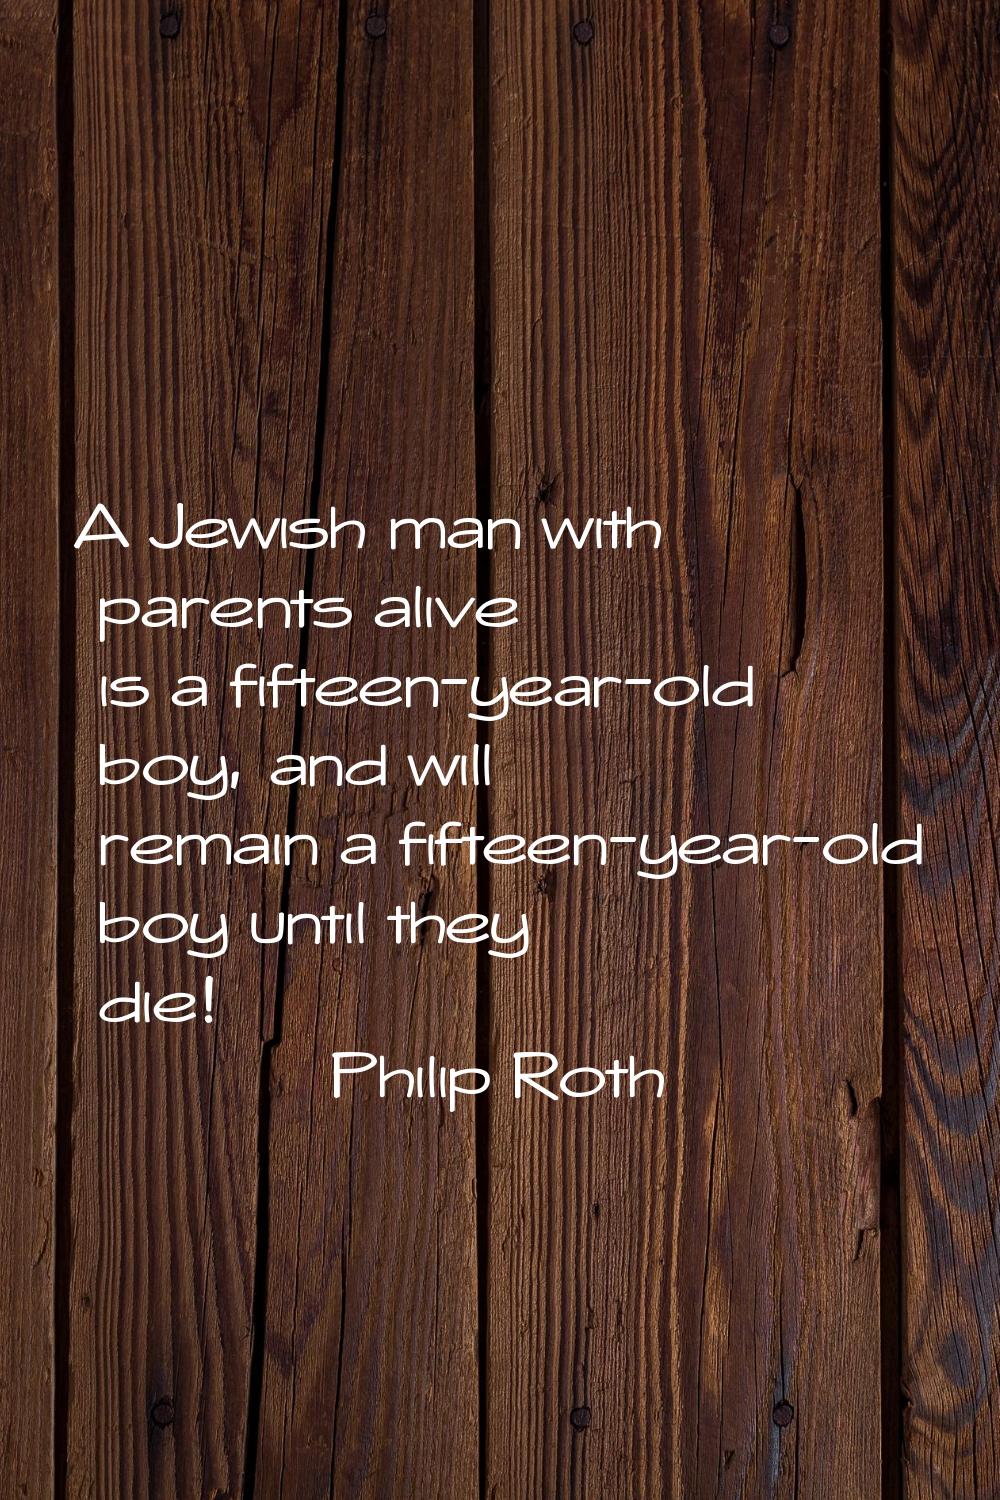 A Jewish man with parents alive is a fifteen-year-old boy, and will remain a fifteen-year-old boy u